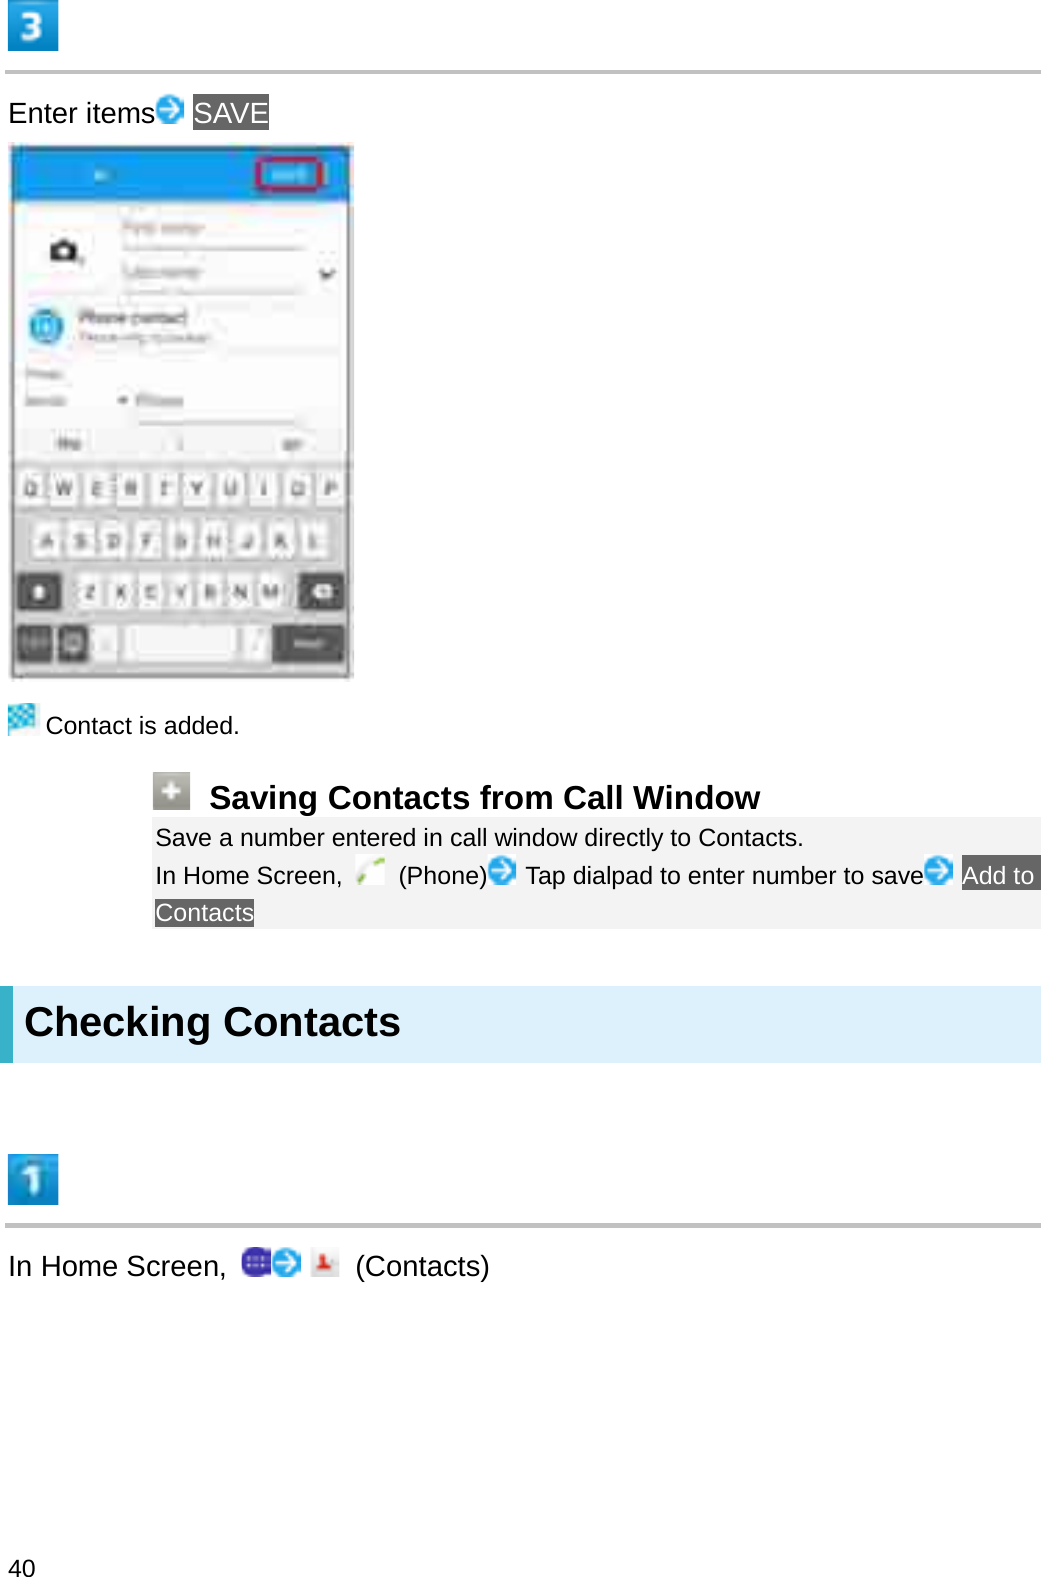 Enter items SAVEContact is added.Saving Contacts from Call WindowSave a number entered in call window directly to Contacts.In Home Screen,  (Phone) Tap dialpad to enter number to save Add to ContactsChecking ContactsIn Home Screen,  (Contacts)40